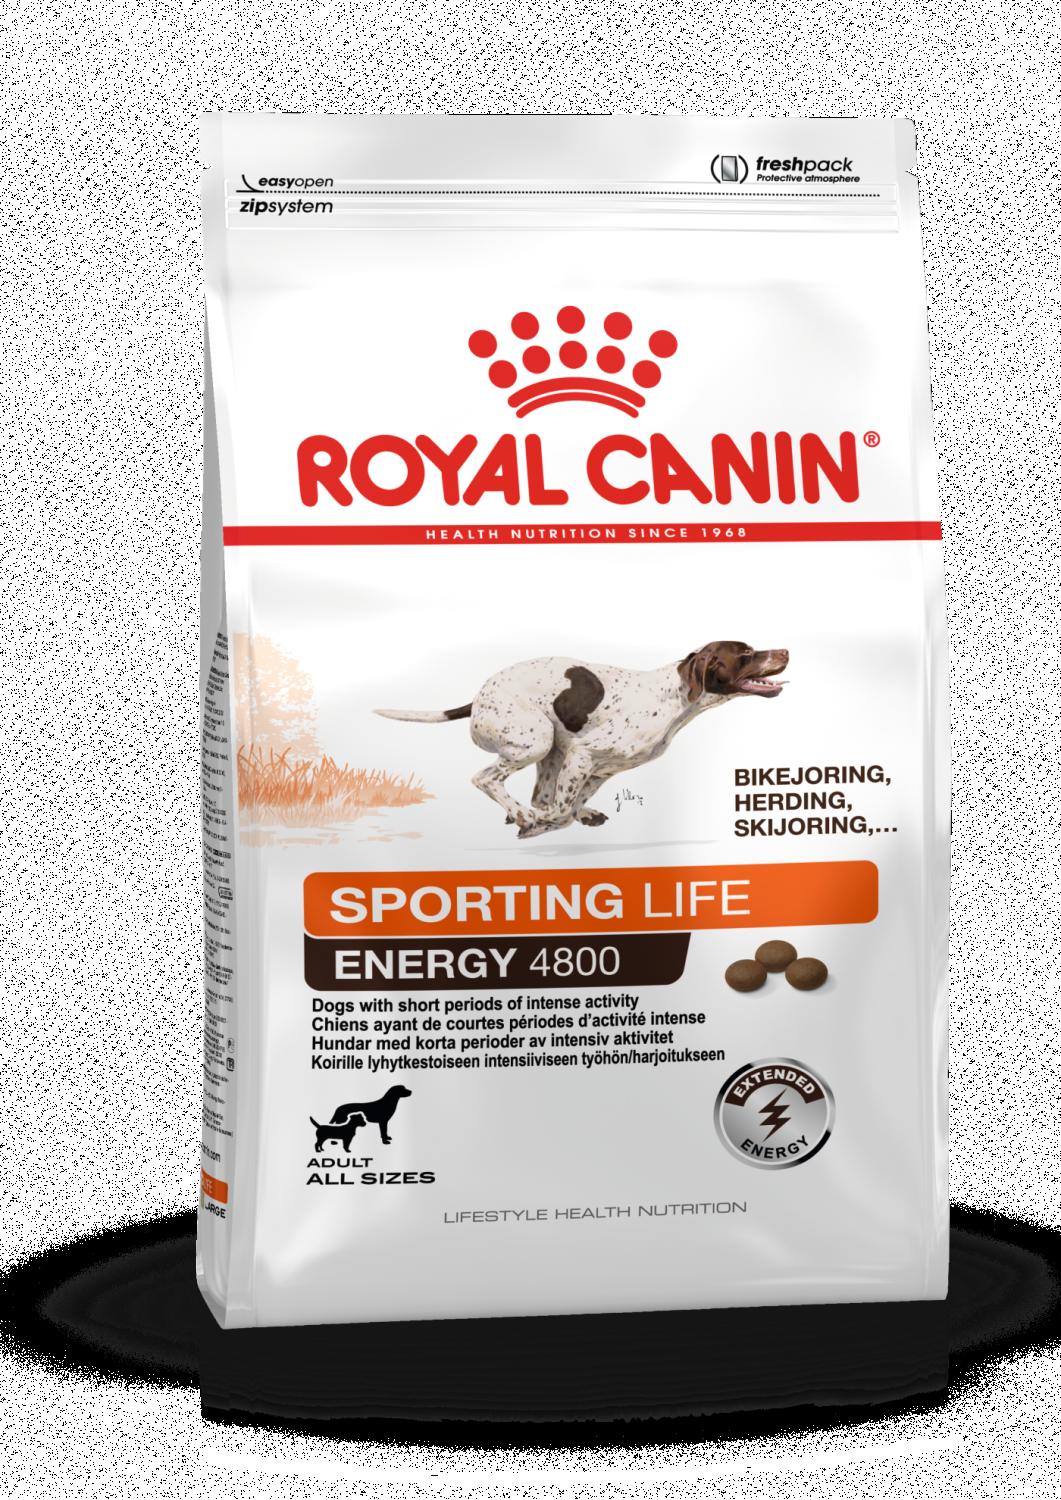 Royal Canin Sporting Life Energy 4800 13kg